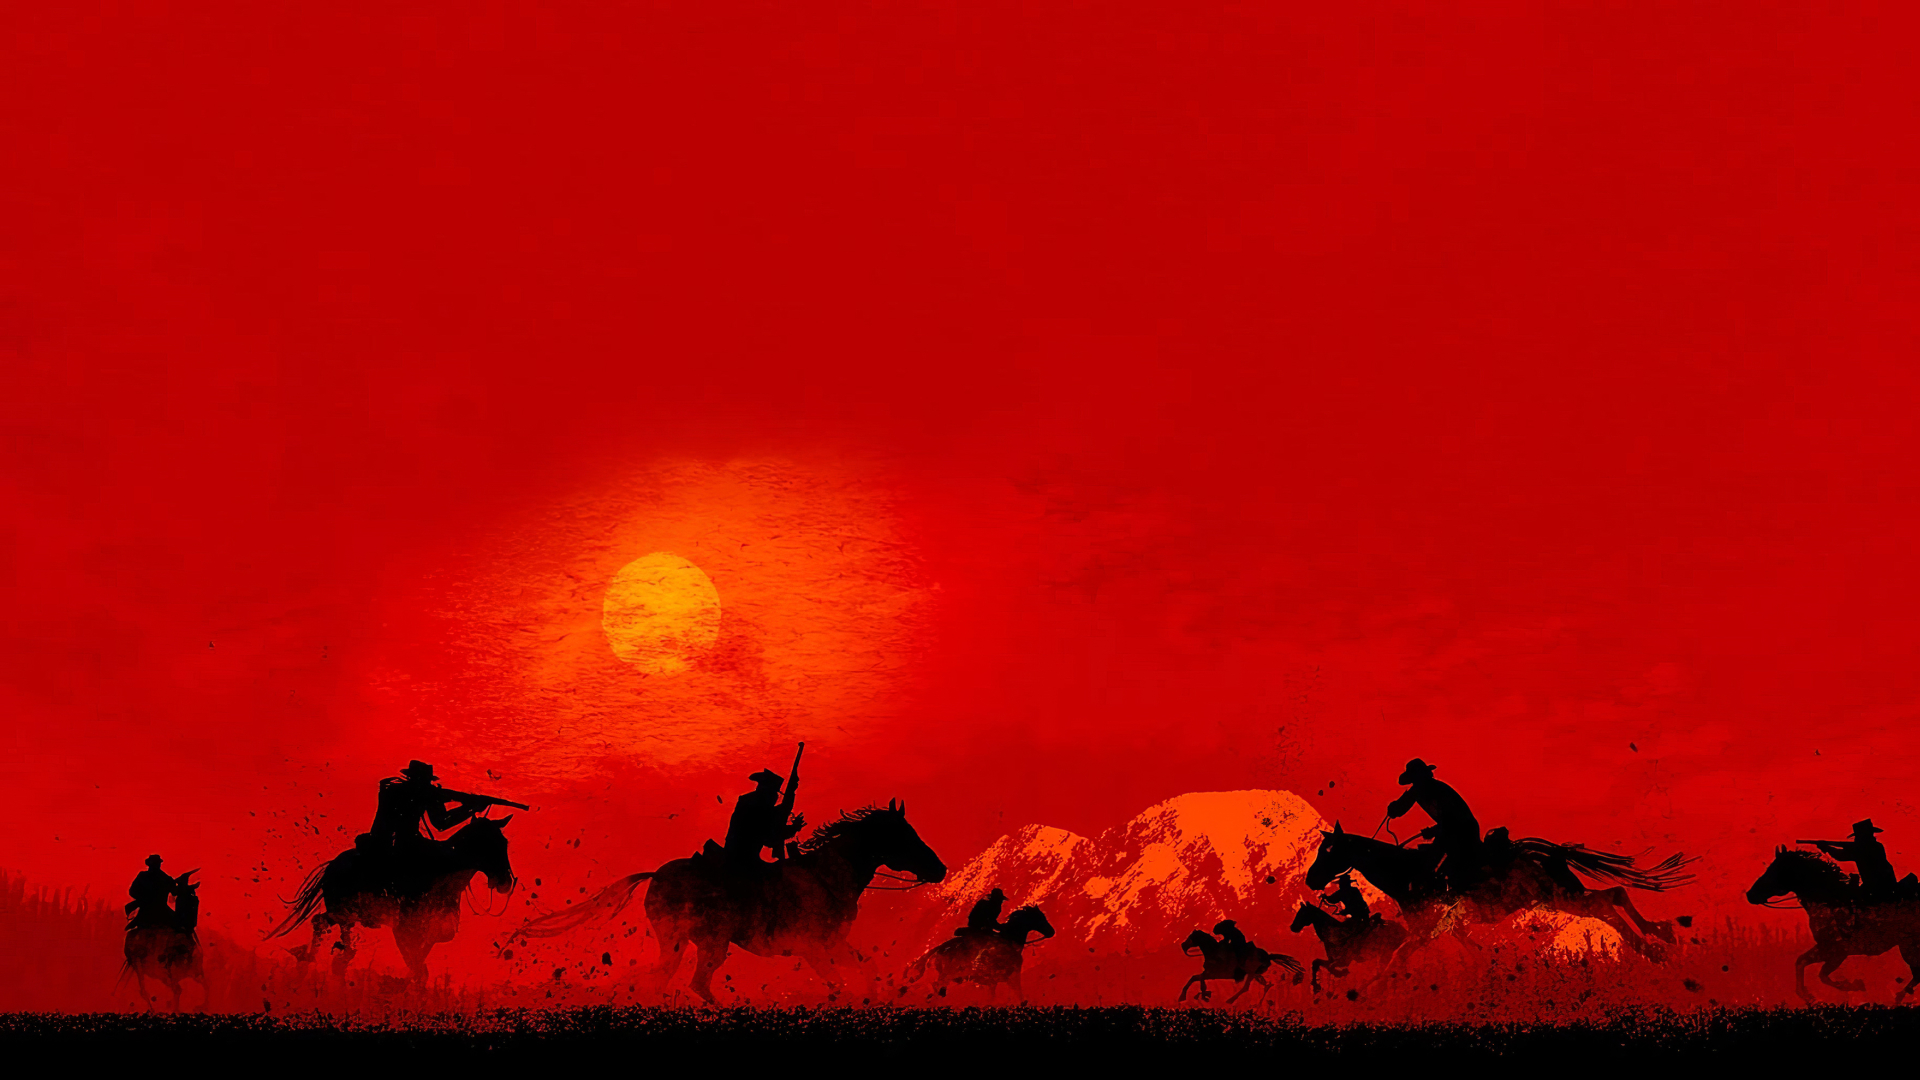 1920x1080 Red Dead Redemption 2 Game 2019 1080p Laptop Full Hd